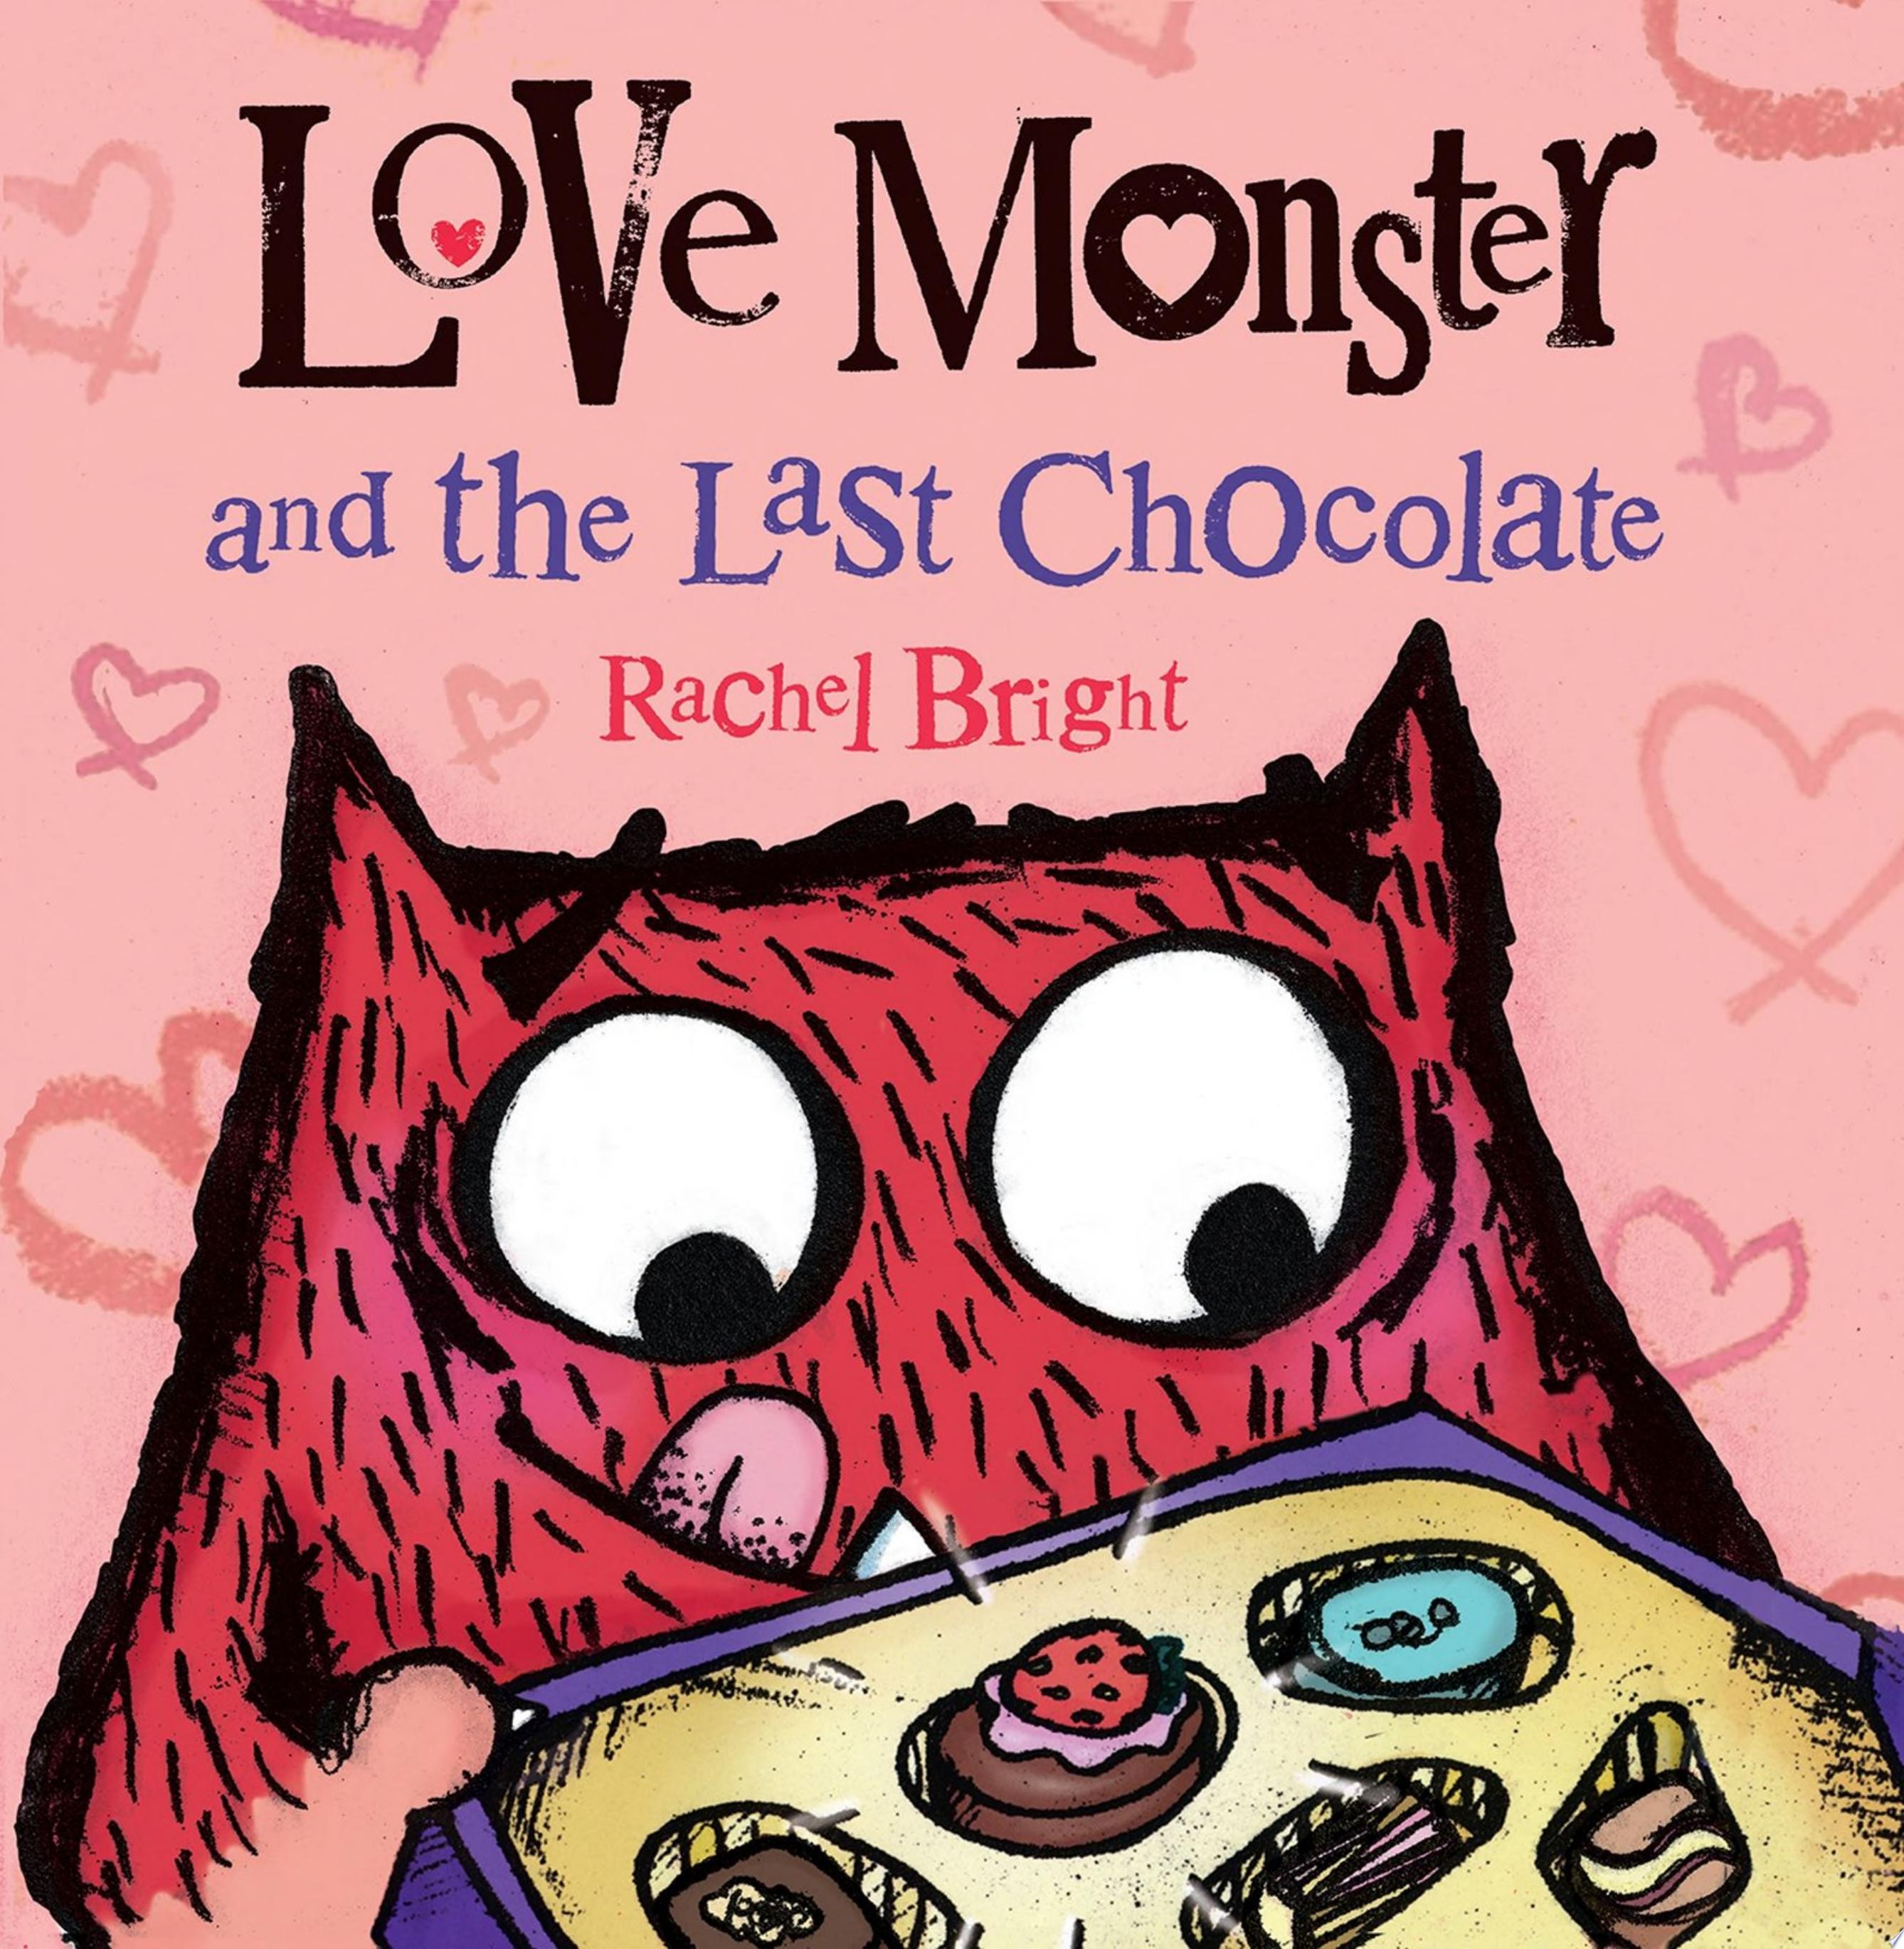 Image for "Love Monster and the Last Chocolate"